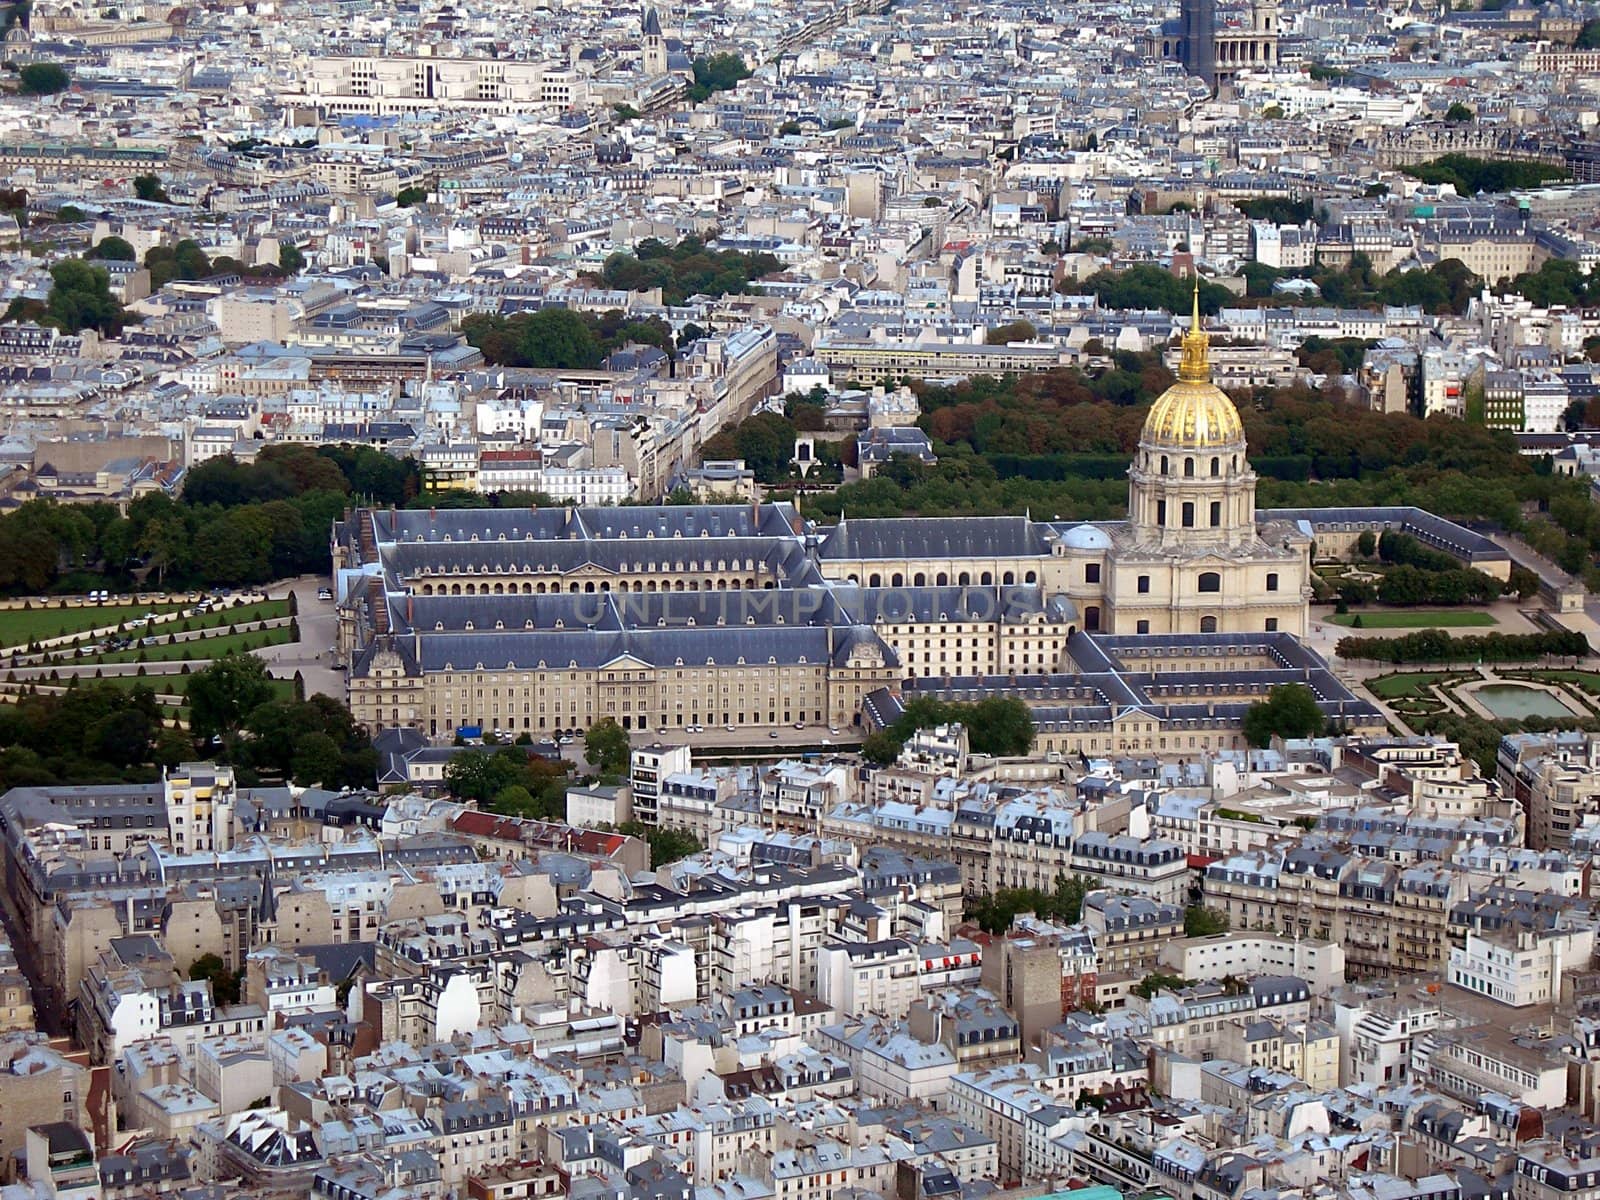 View at Invalide from eiffel tower in Paris 